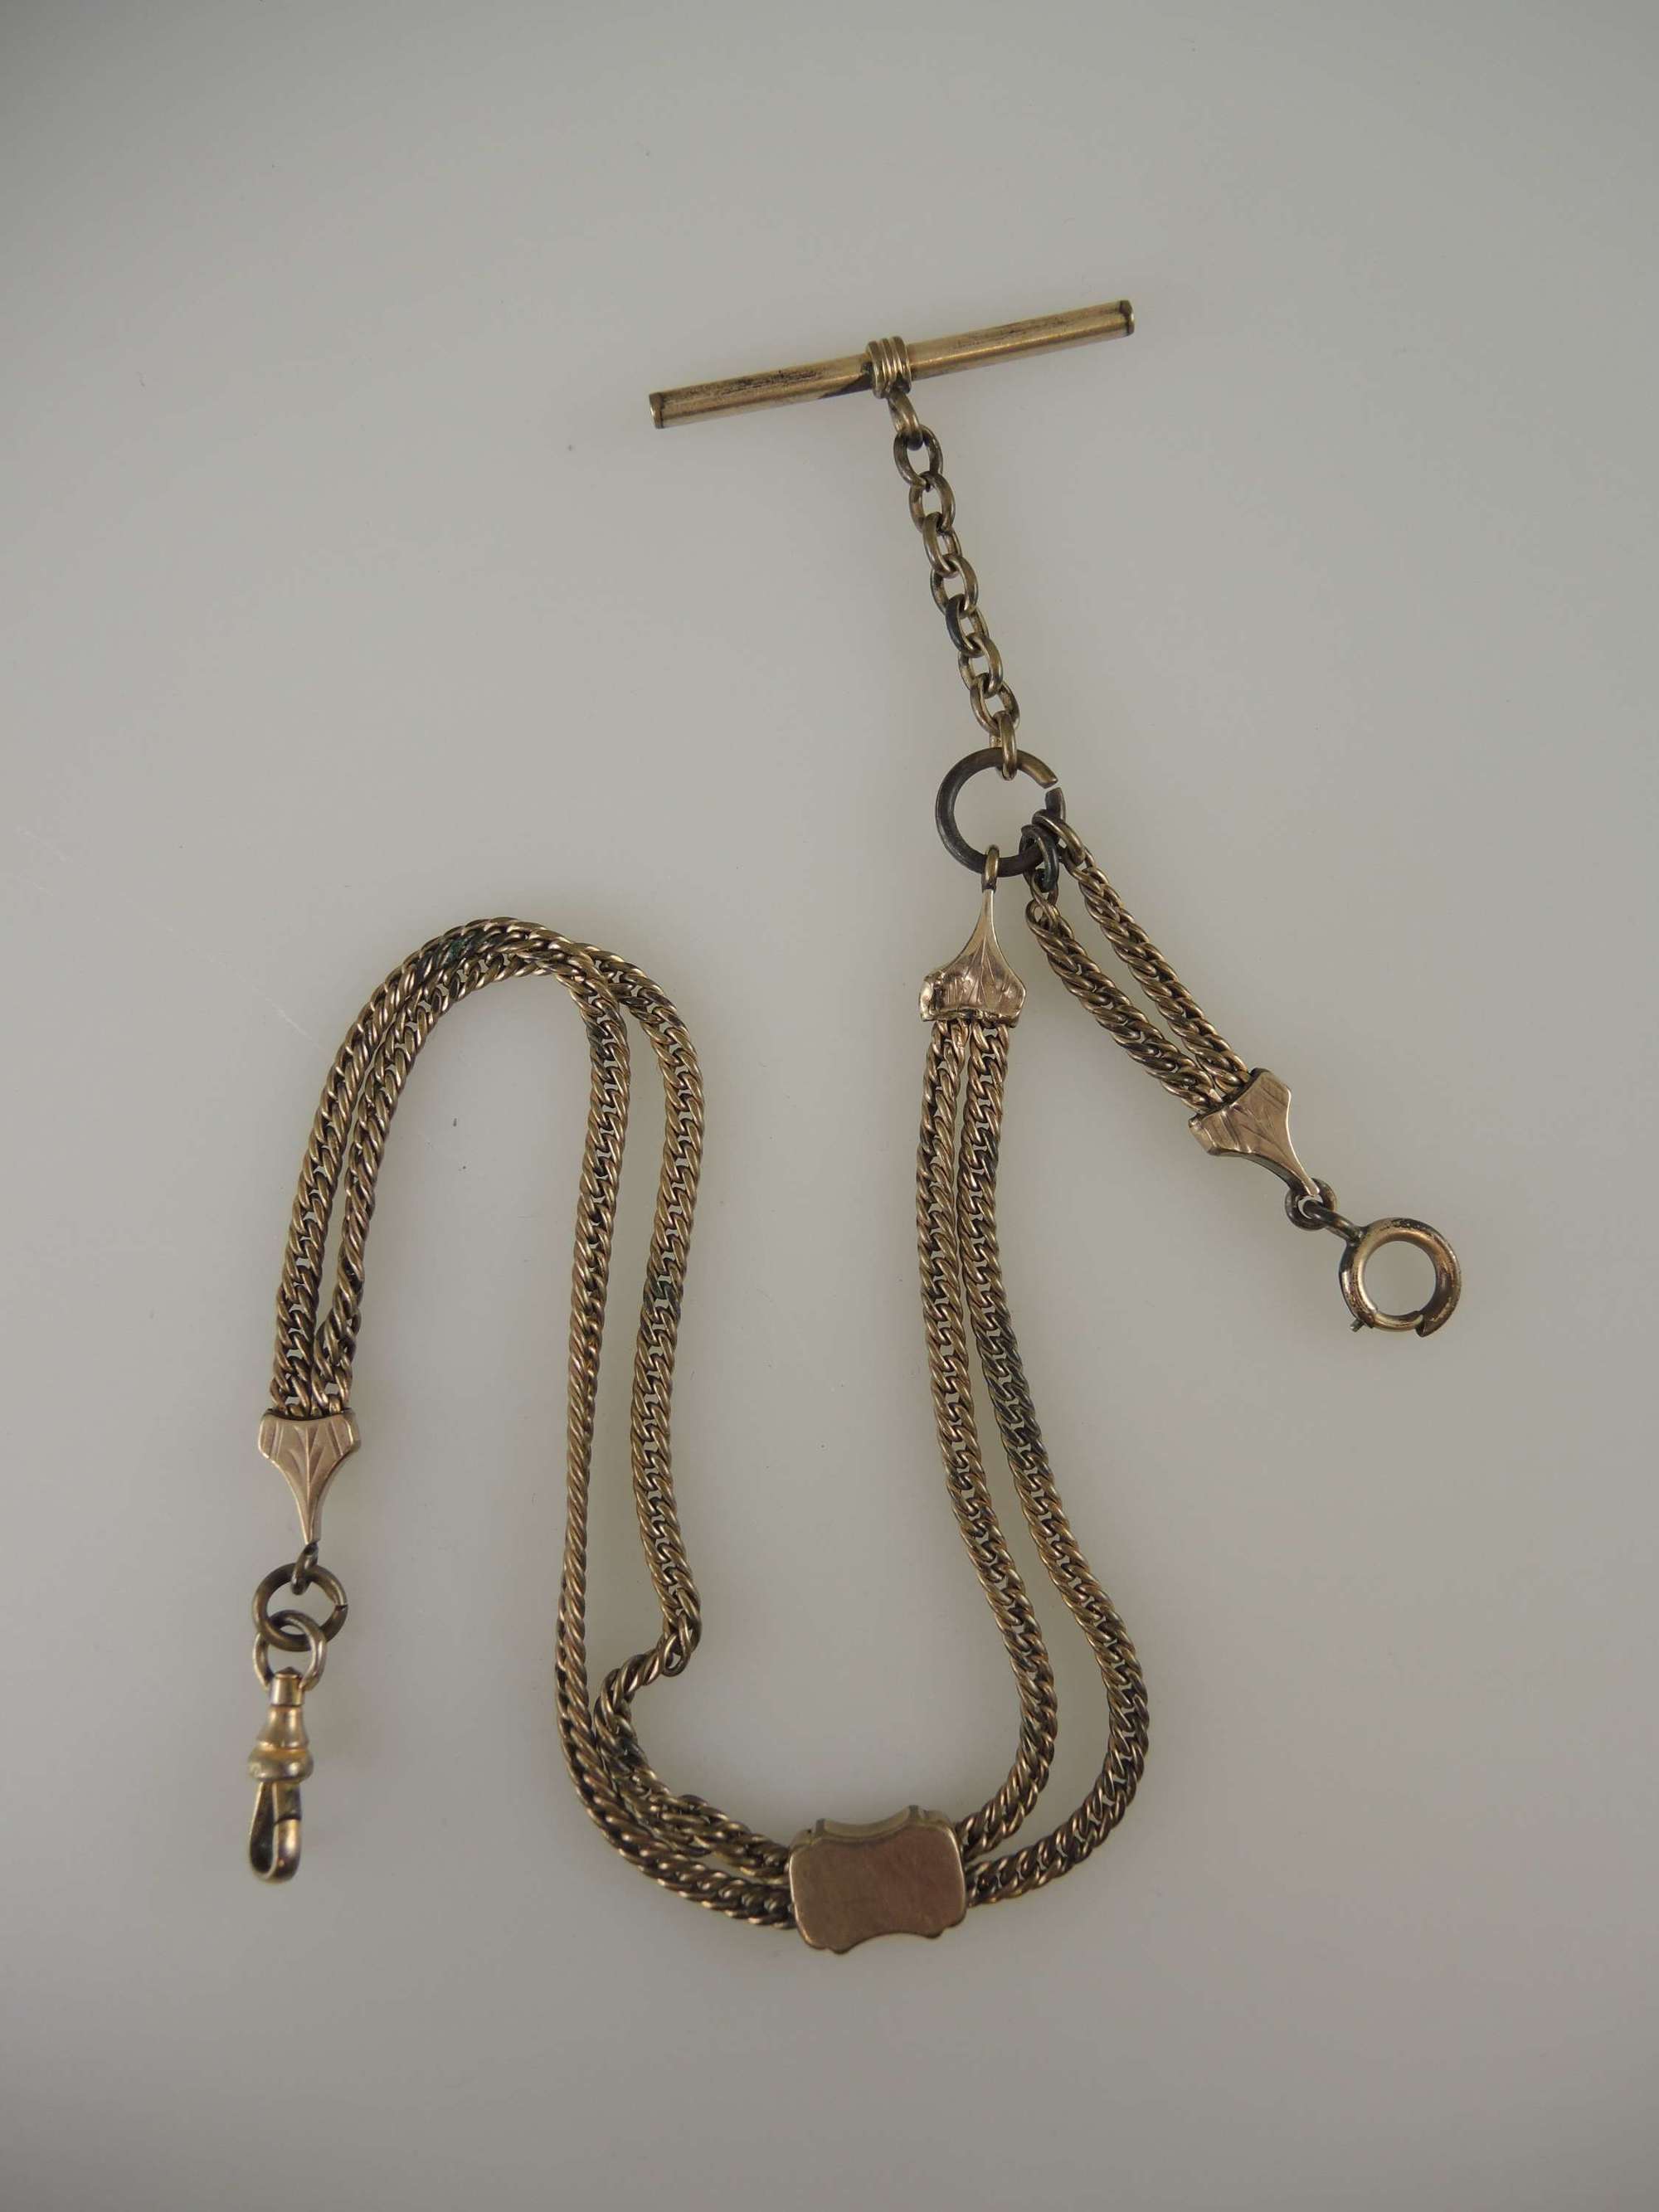 Peaky Blinders style Victorian pocket watch chain c1890